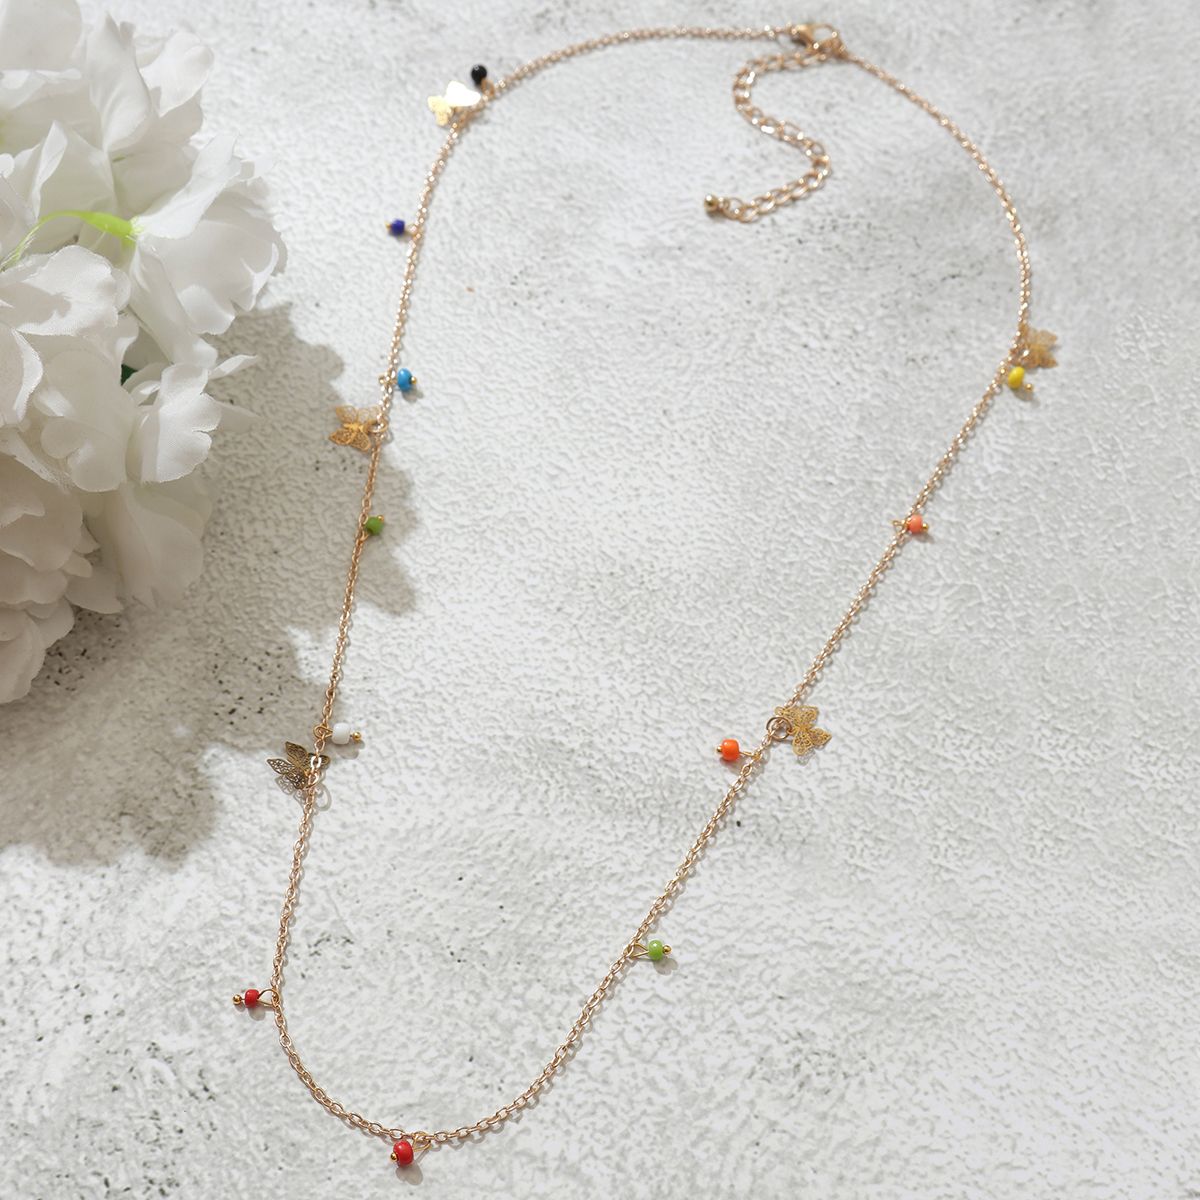 Colorful Beads Contemporary Body Chain